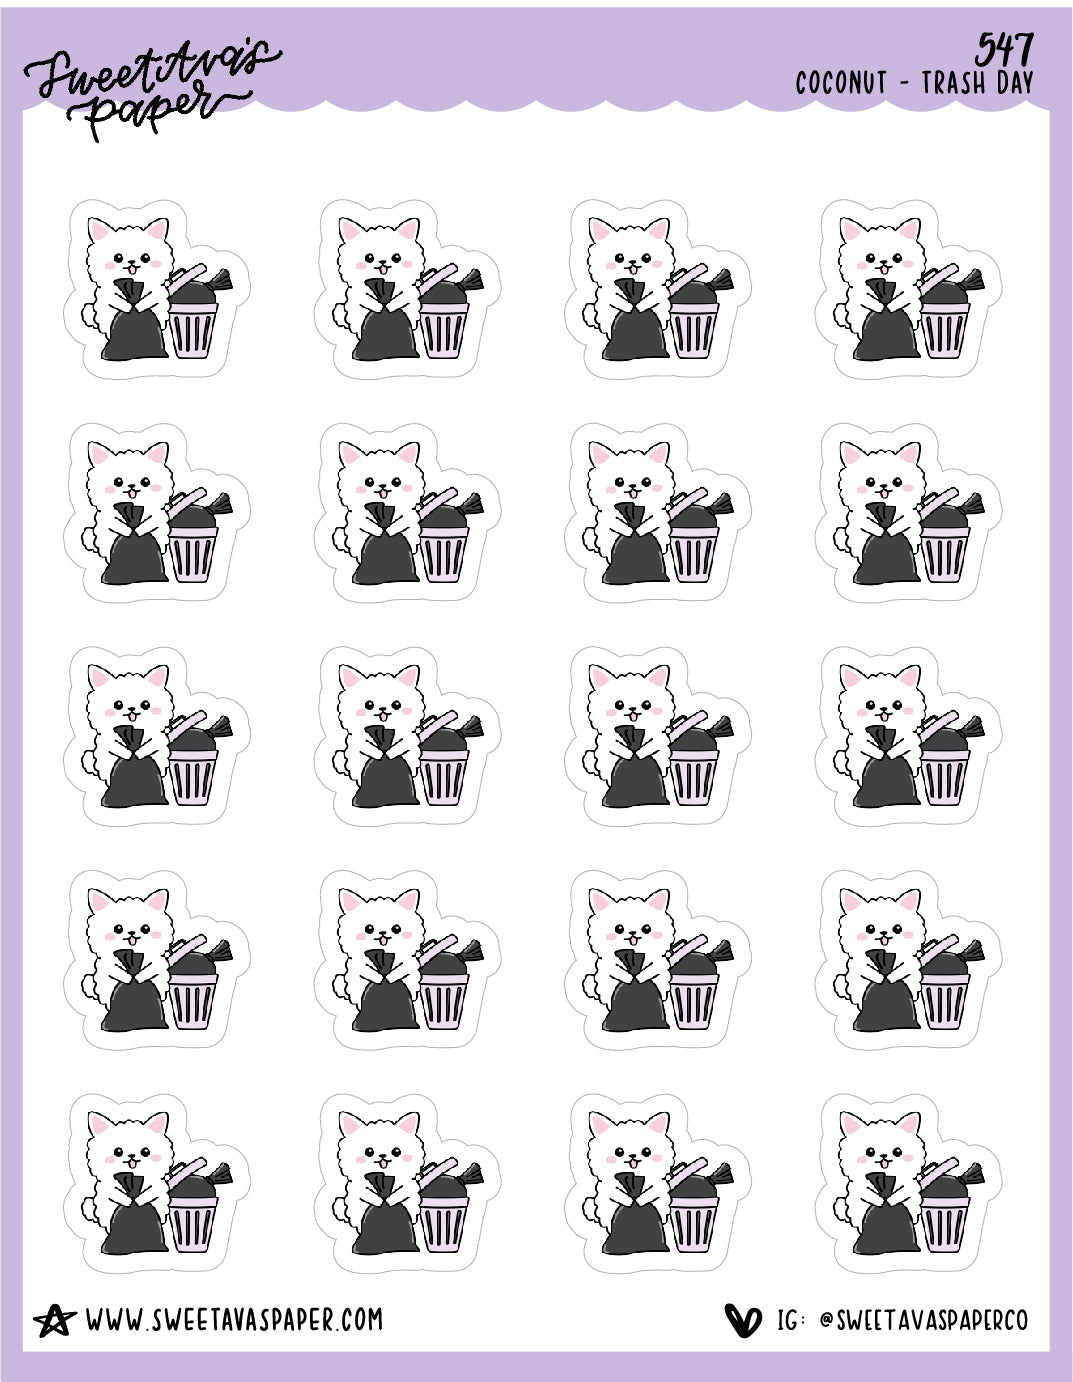 Trash Day Planner Stickers - Coconut the Puppy [547]